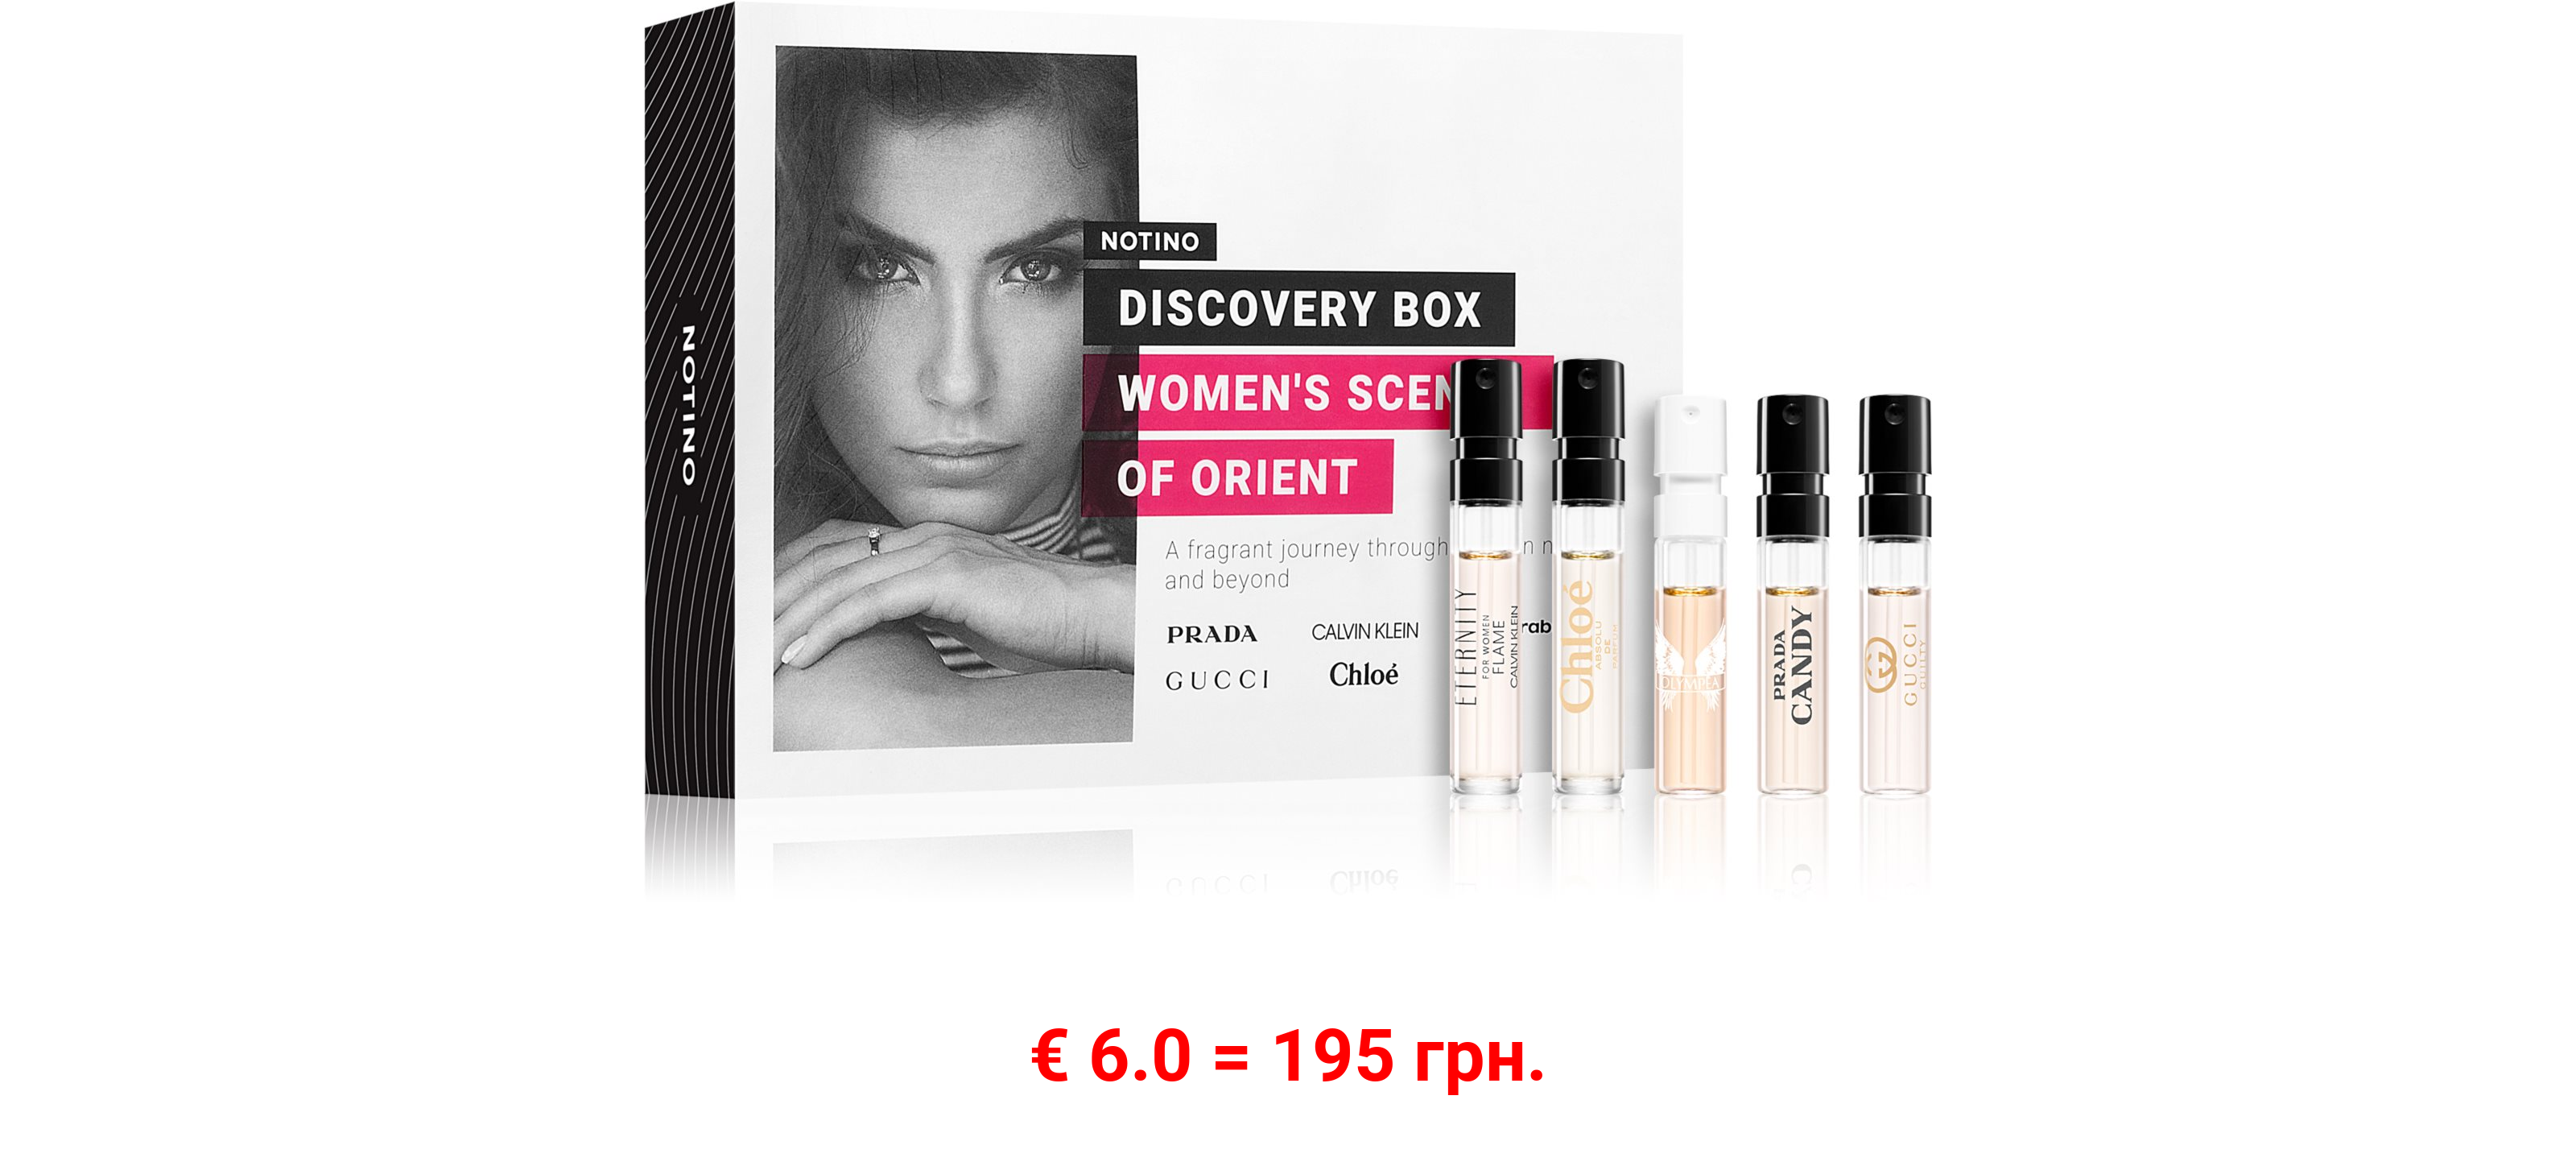 Discovery Box Notino Women's Scents of Orient